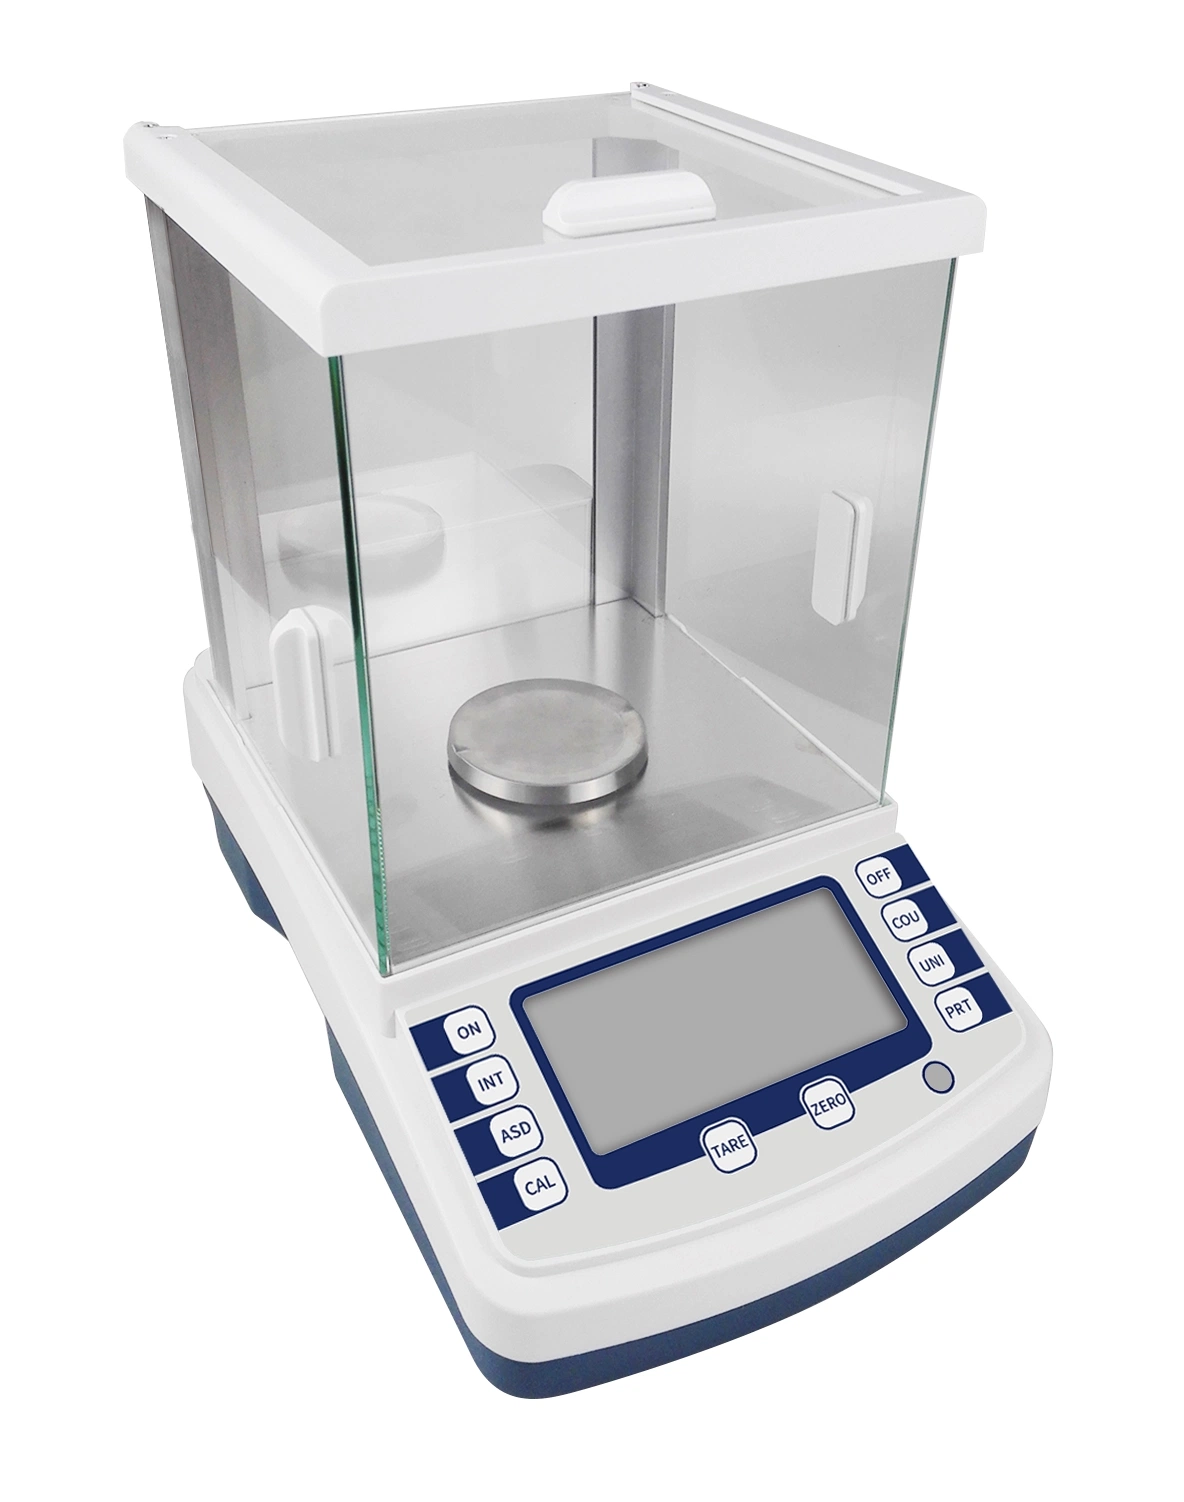 High Speed 220g/0.1mg Analytical Balance Laboratory Scale with Internal Calibration